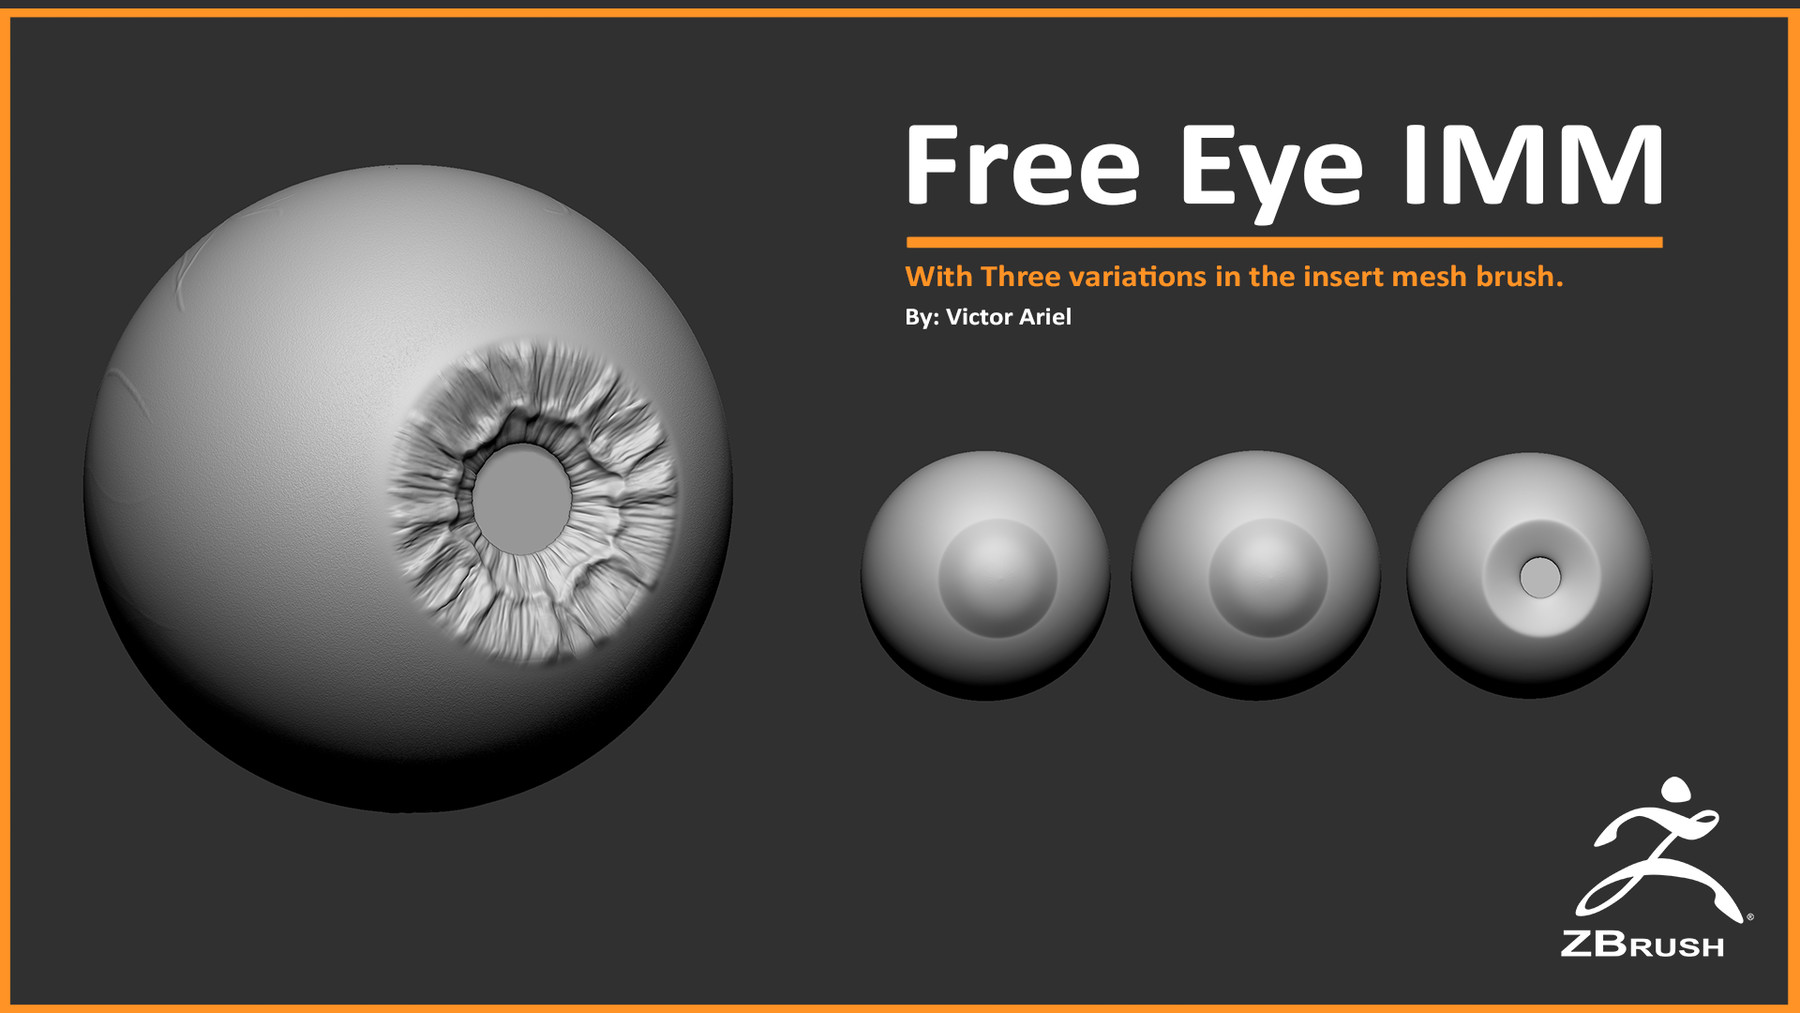 zbrush student download